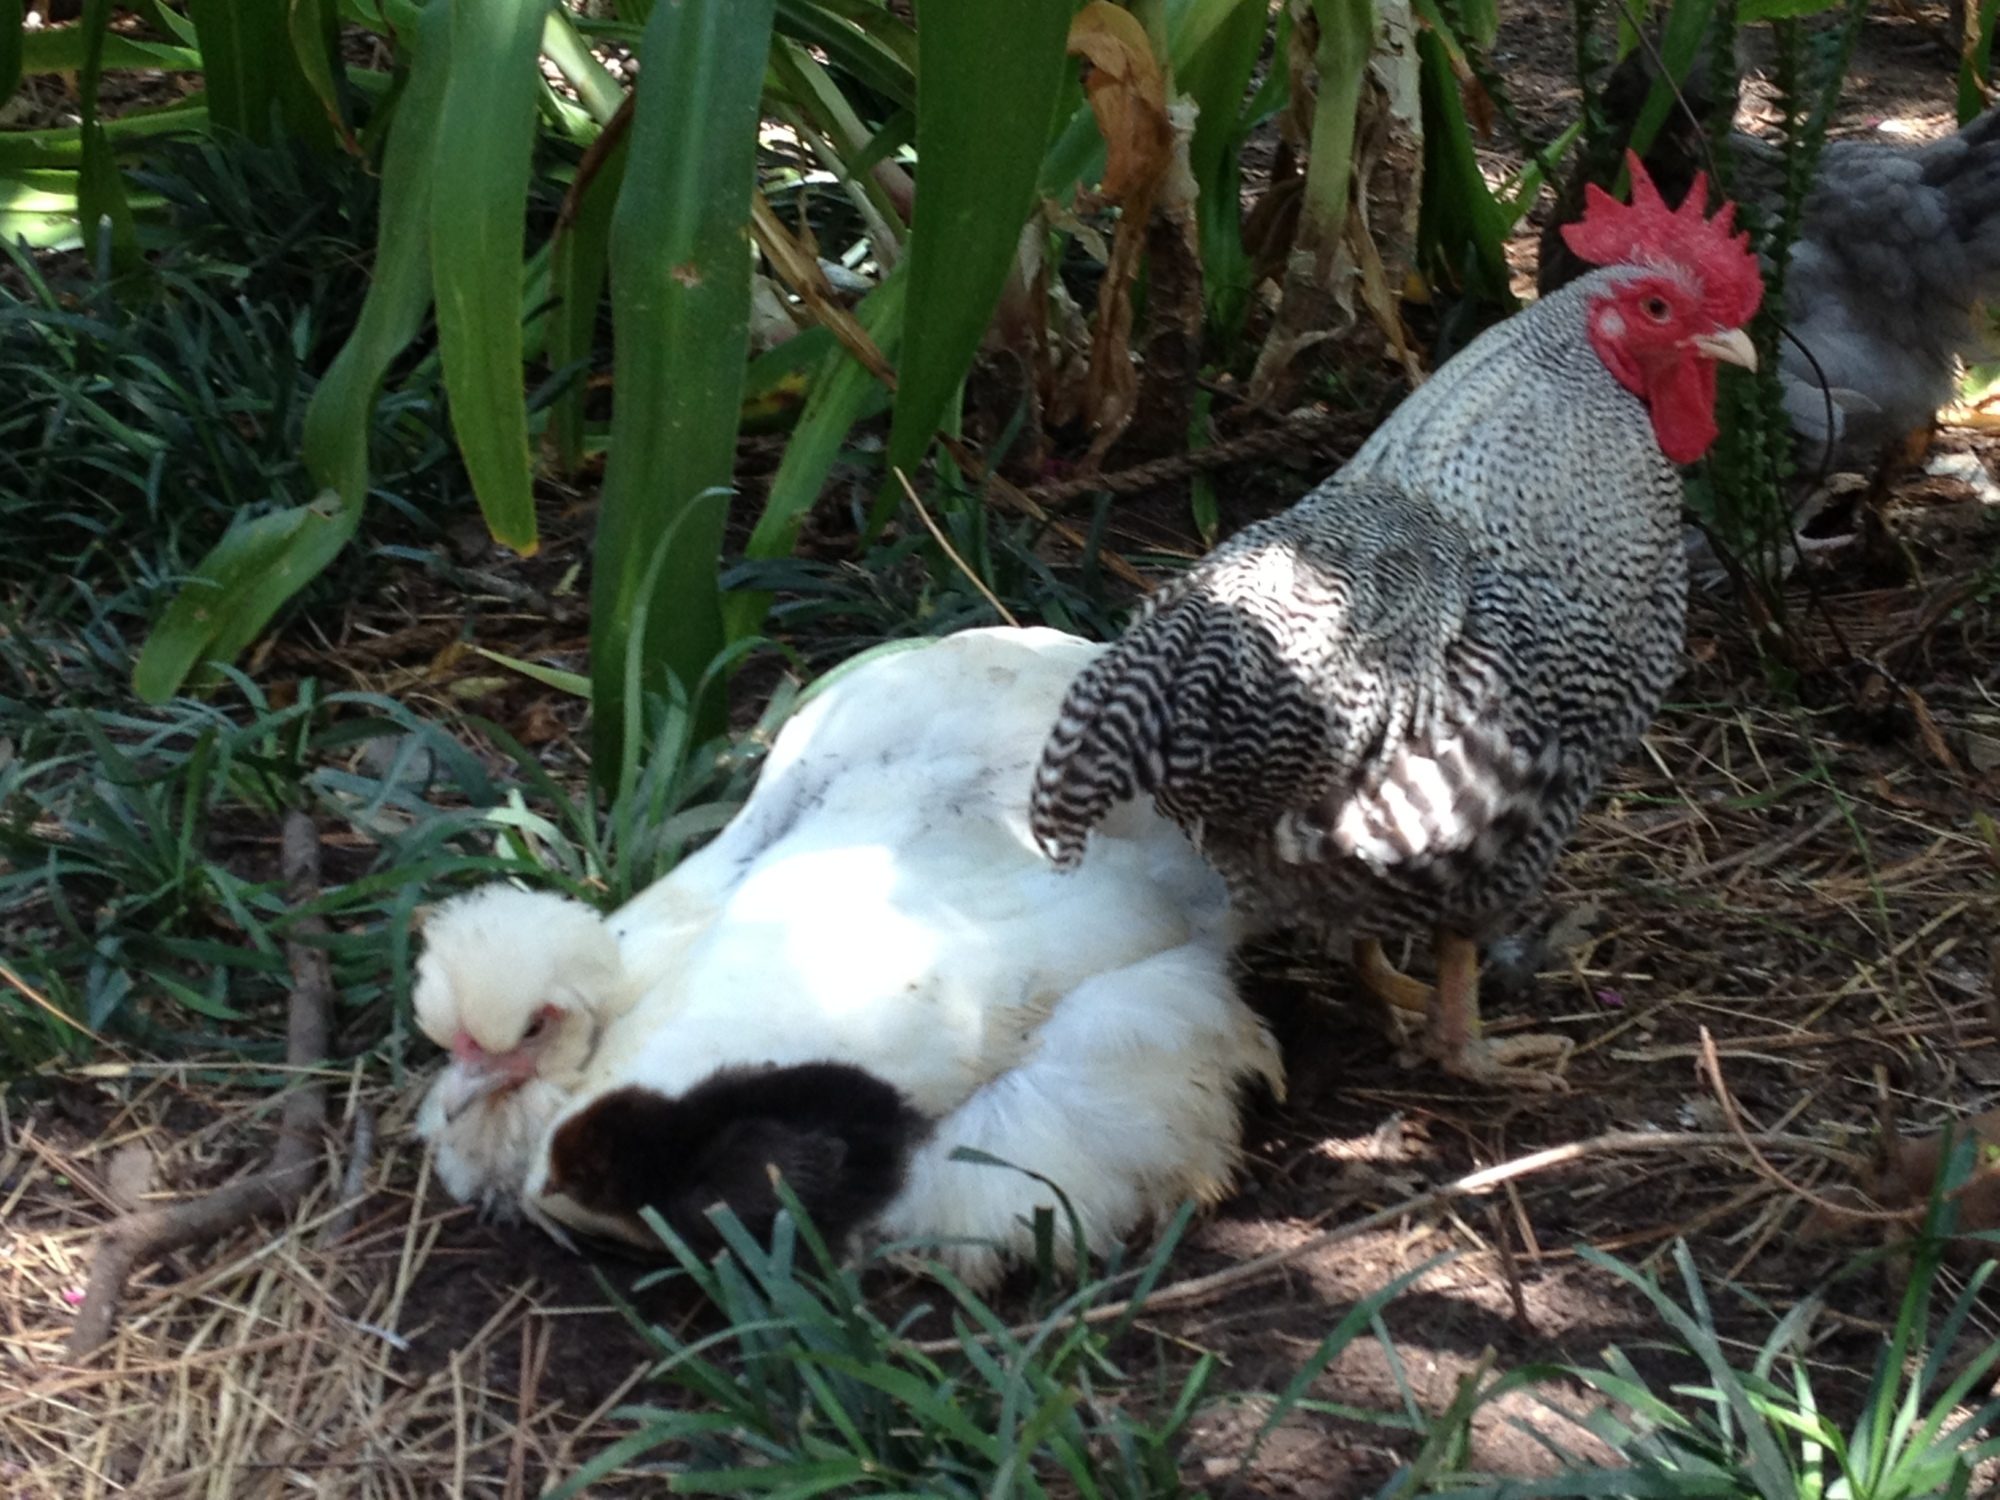 my barred-rock rooster Squeaky
and my silkie/coachen hen Rosie with her baby